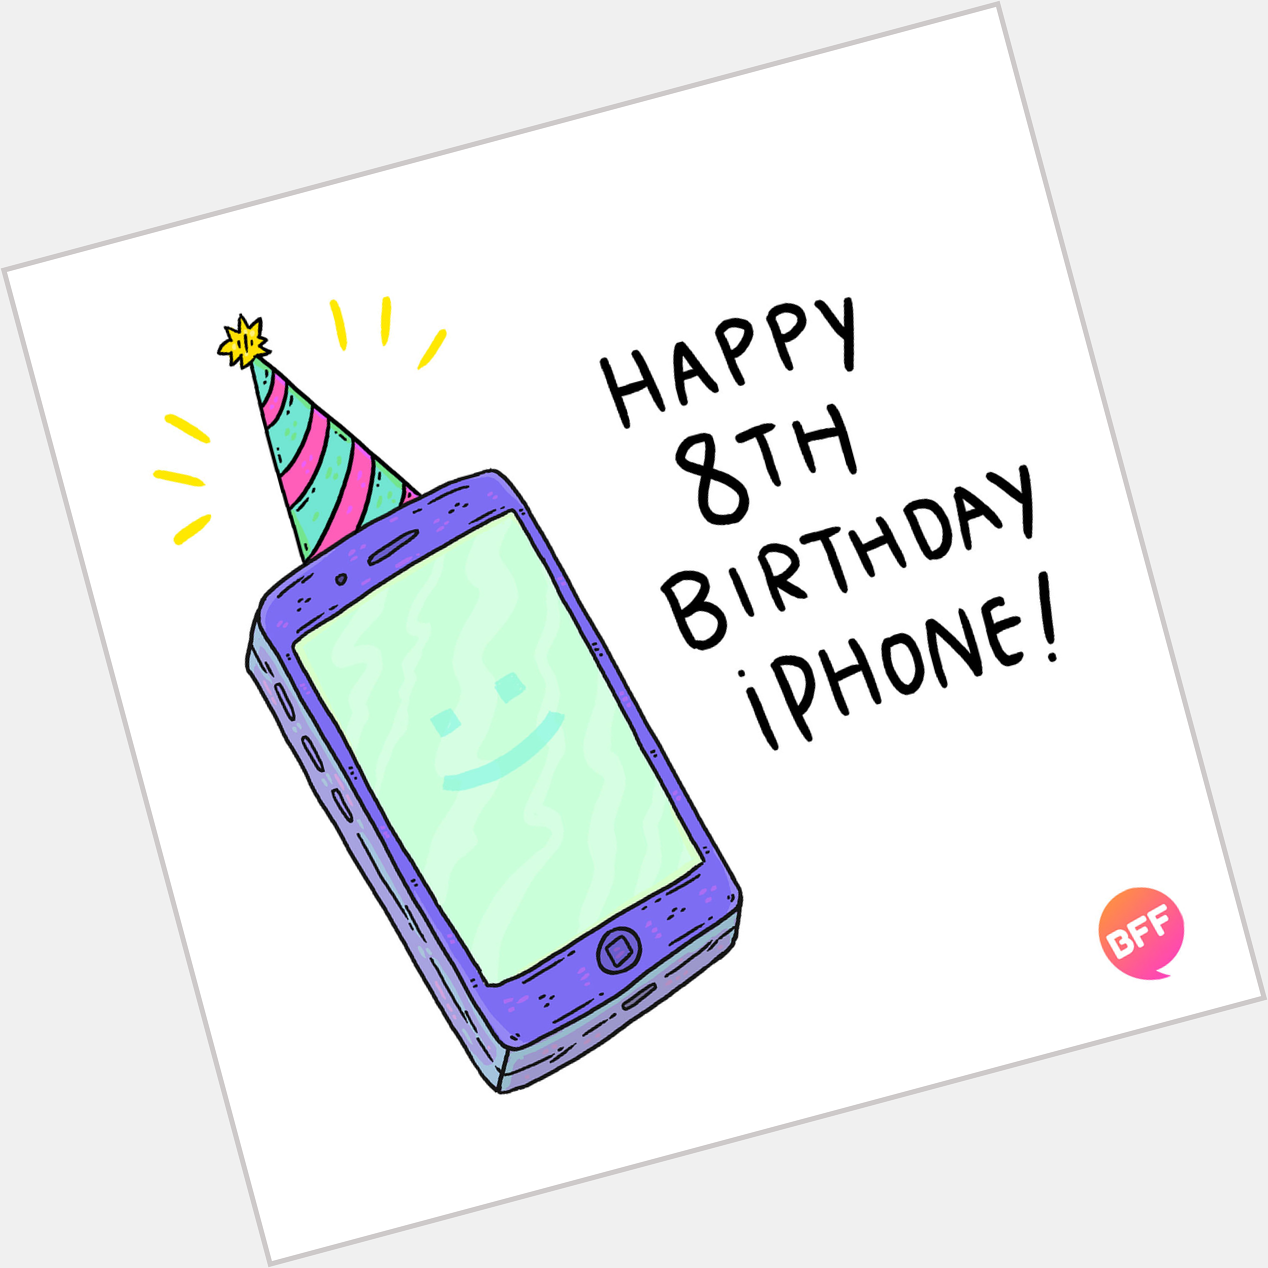 Happy birthday to the iPhone, Kate Middleton, and my mom.  (Image credit 